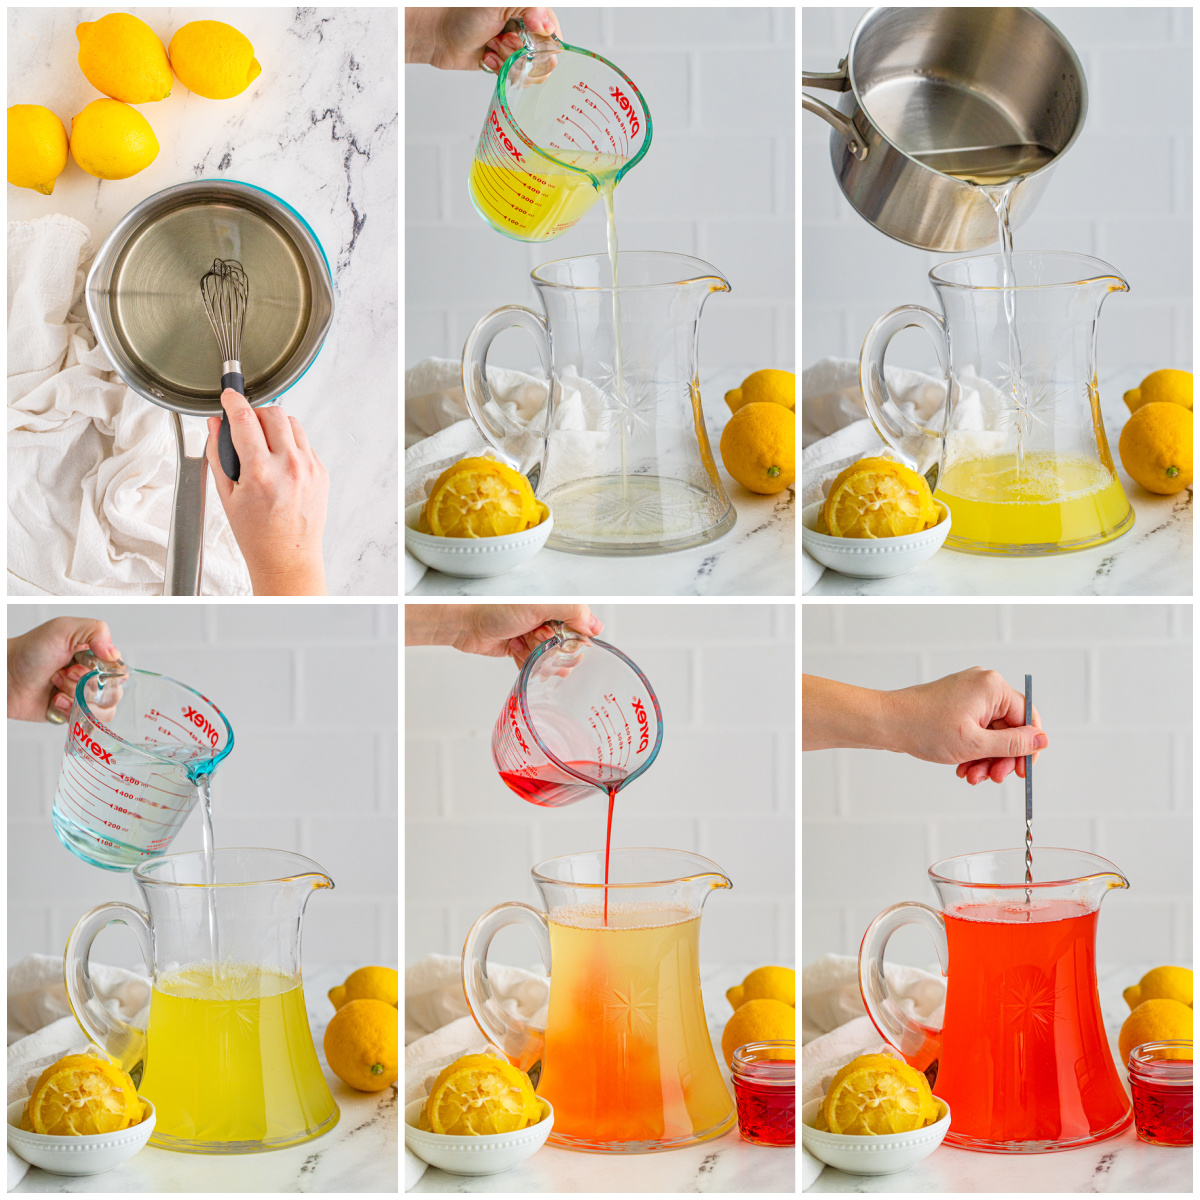 Step by step photos on how to make a Pink Lemonade Recipe